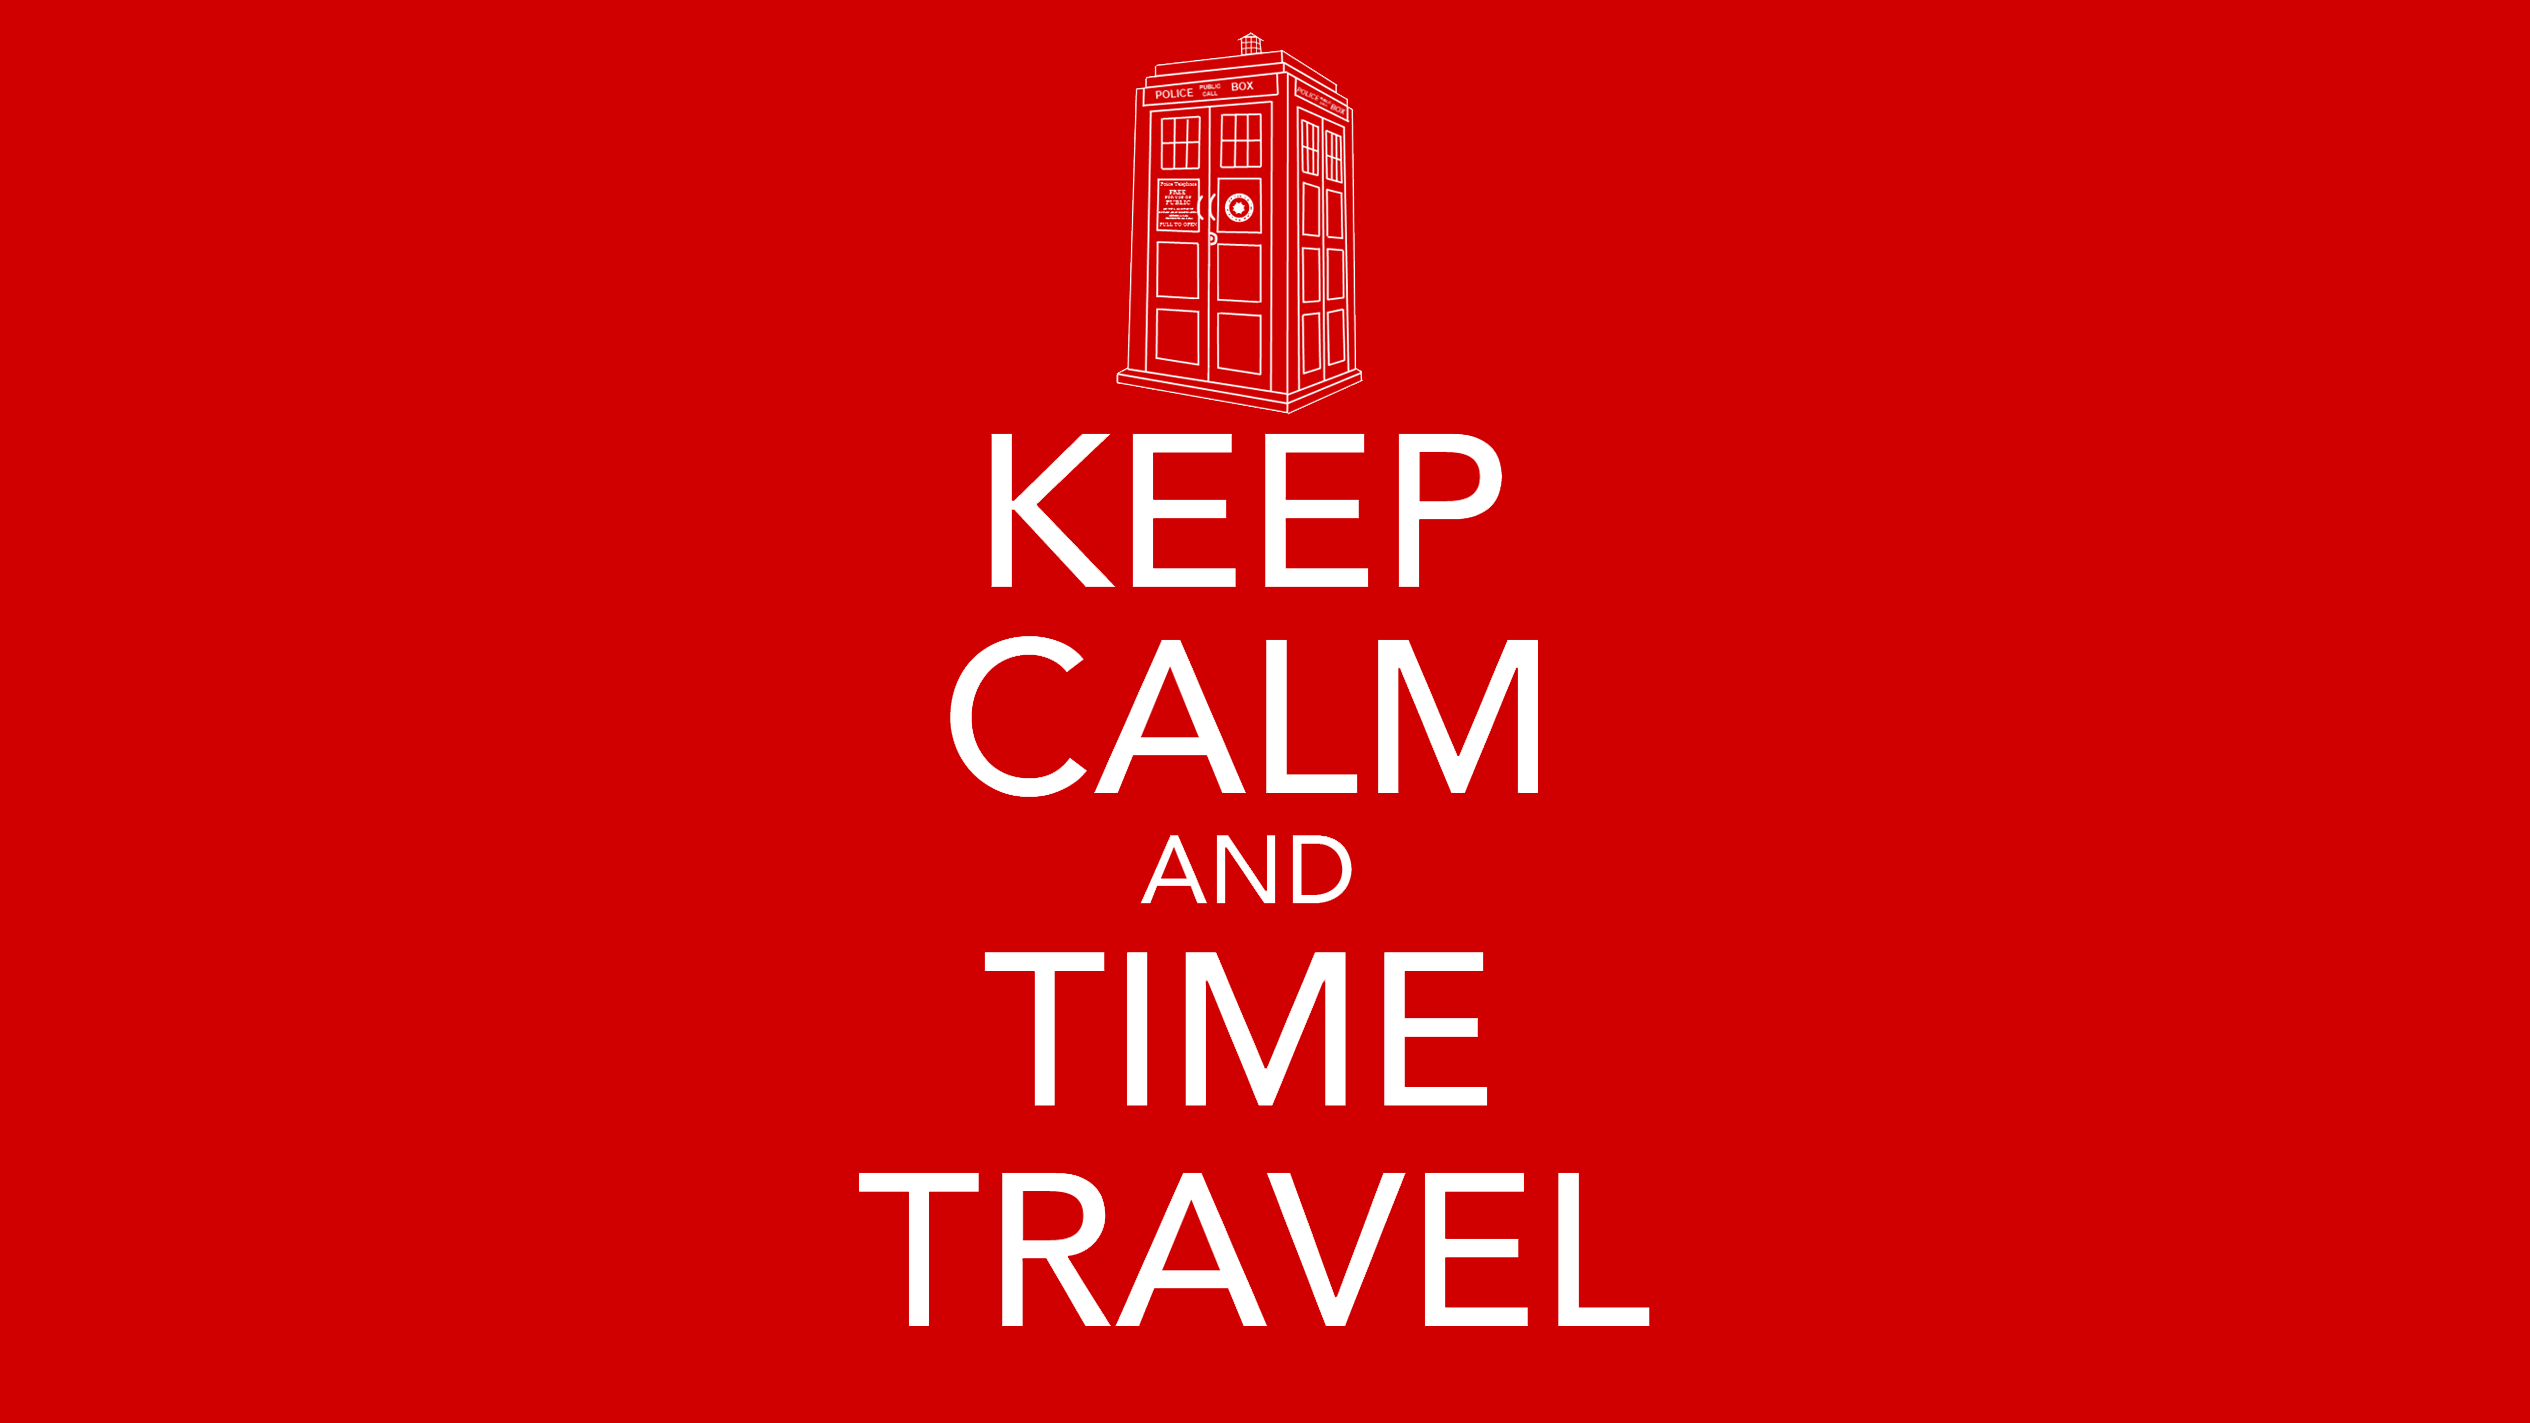 Doctor Who Red The Doctor TARDiS Artwork Time Travel Keep Calm And 2530x1423